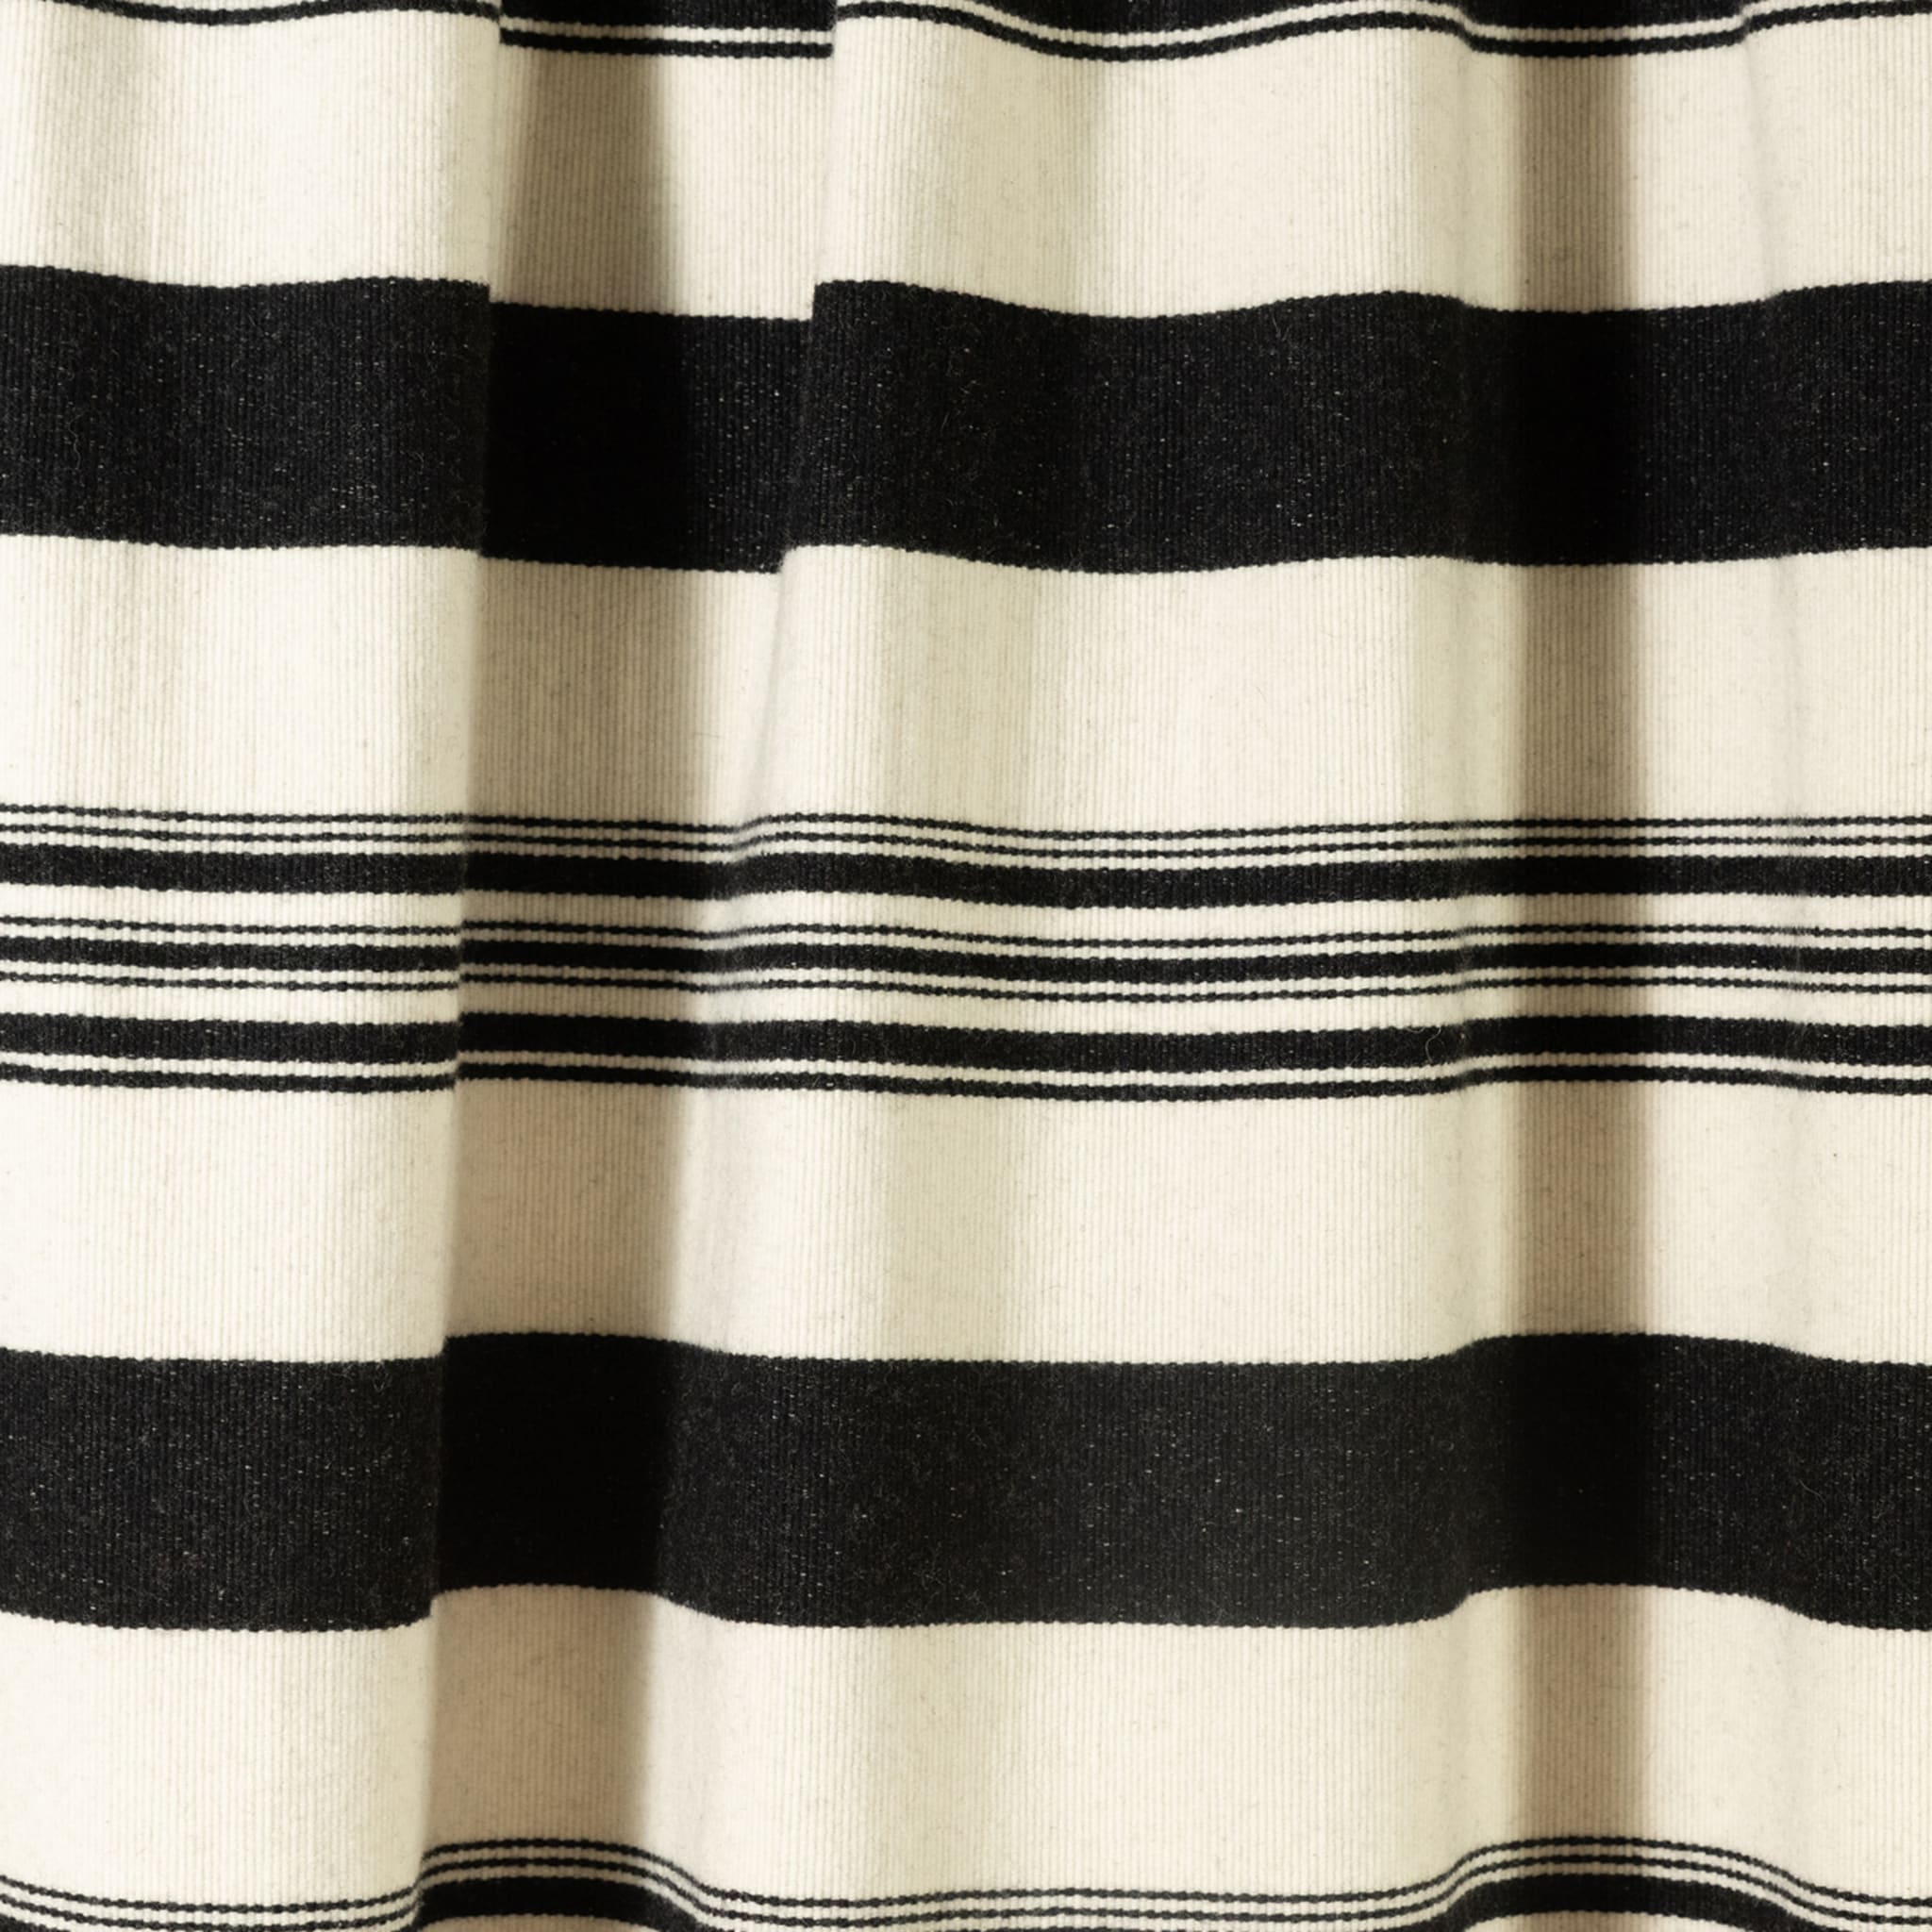 Tacke.d2 Fringed Striped Black-And-White Blanket - Alternative view 1